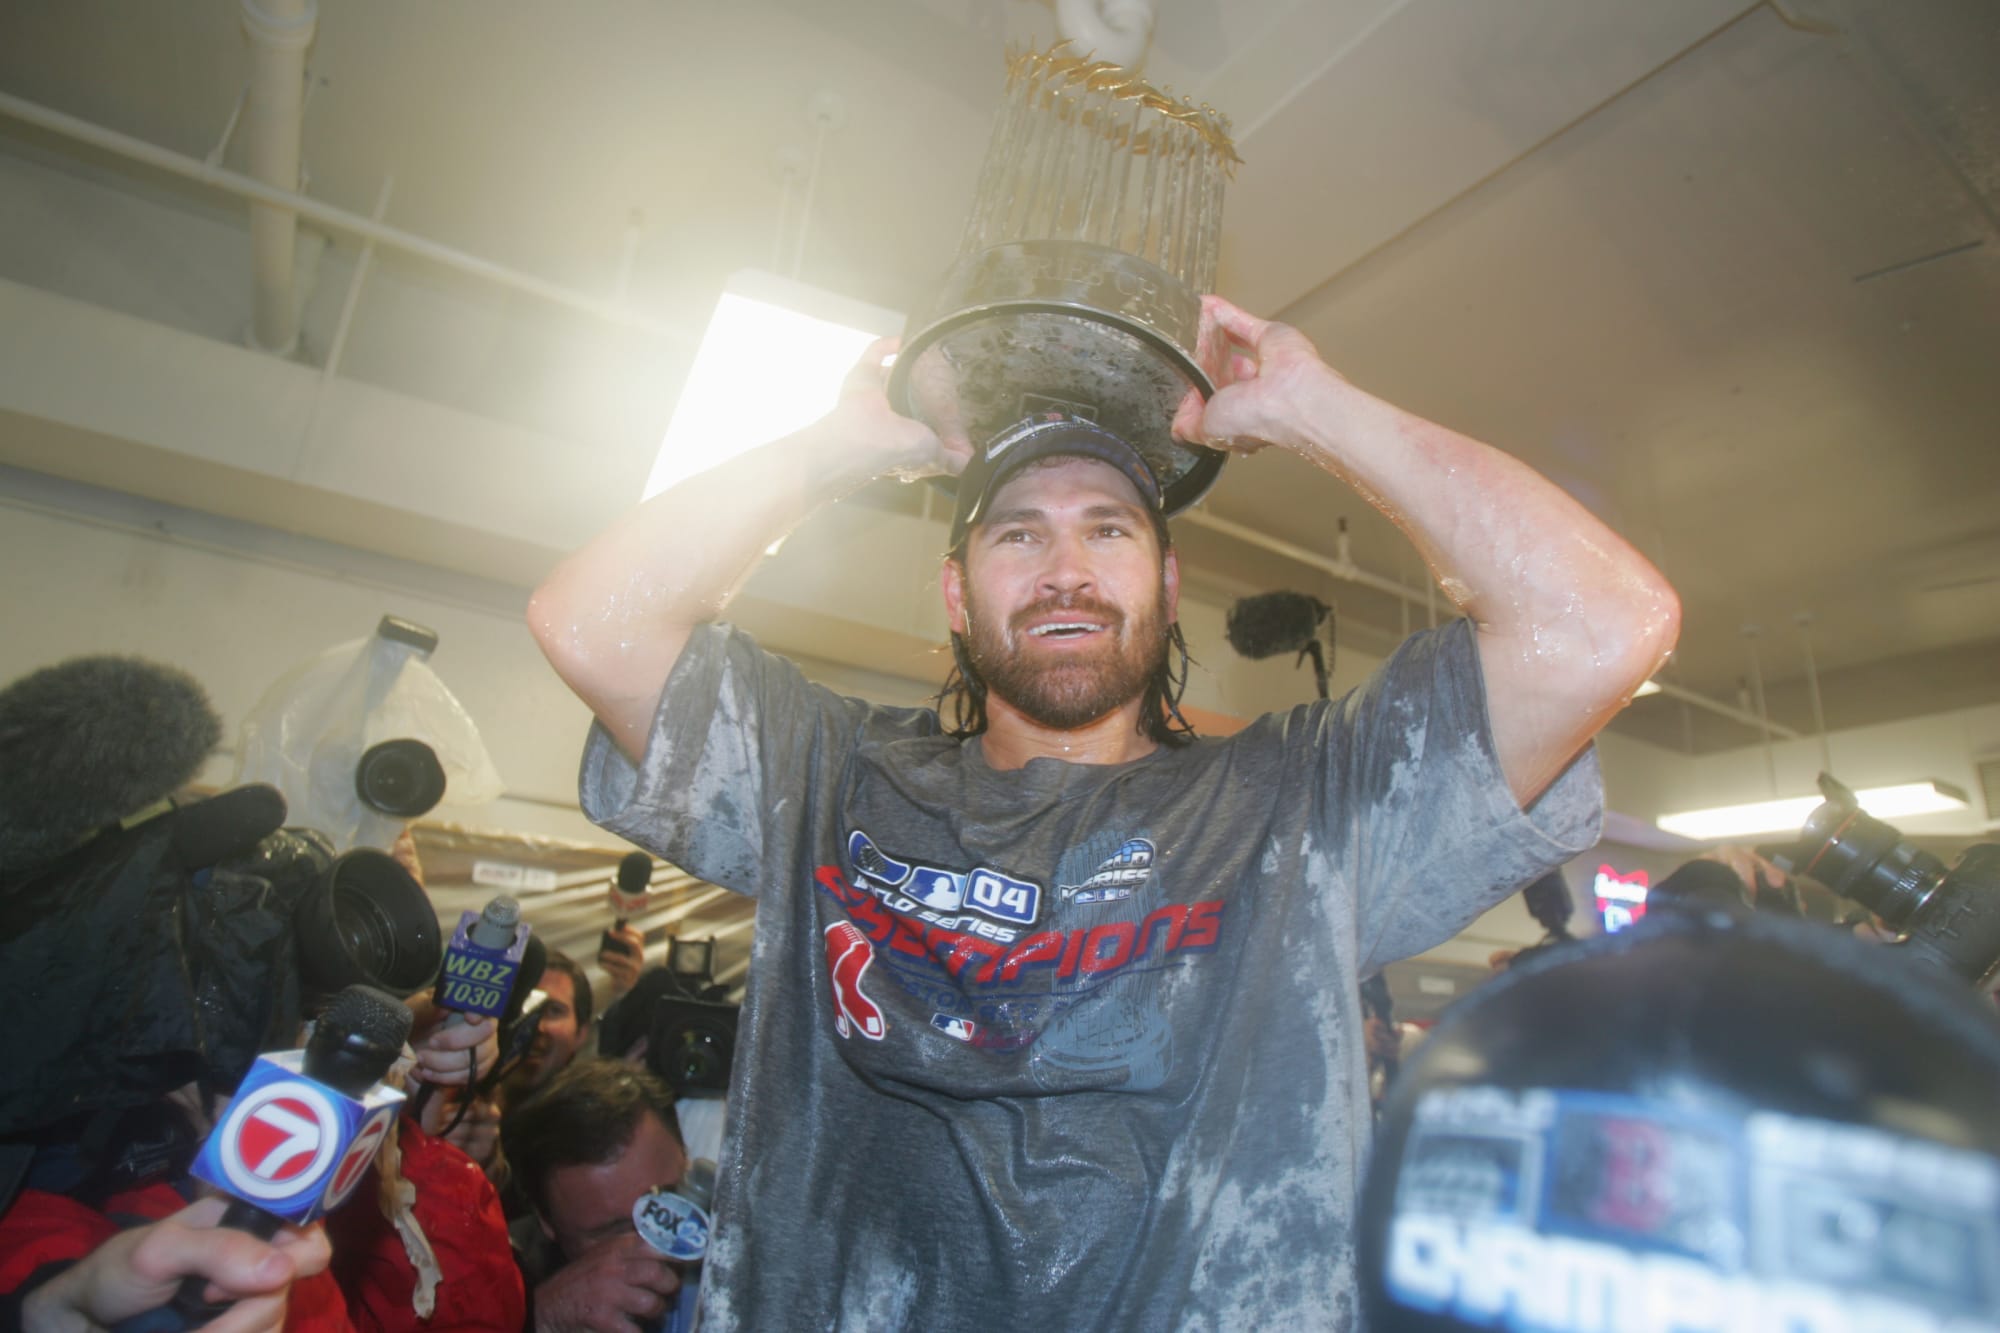 Johnny Damon BEFORE he gets his famous beard shaved off at the News  Photo - Getty Images